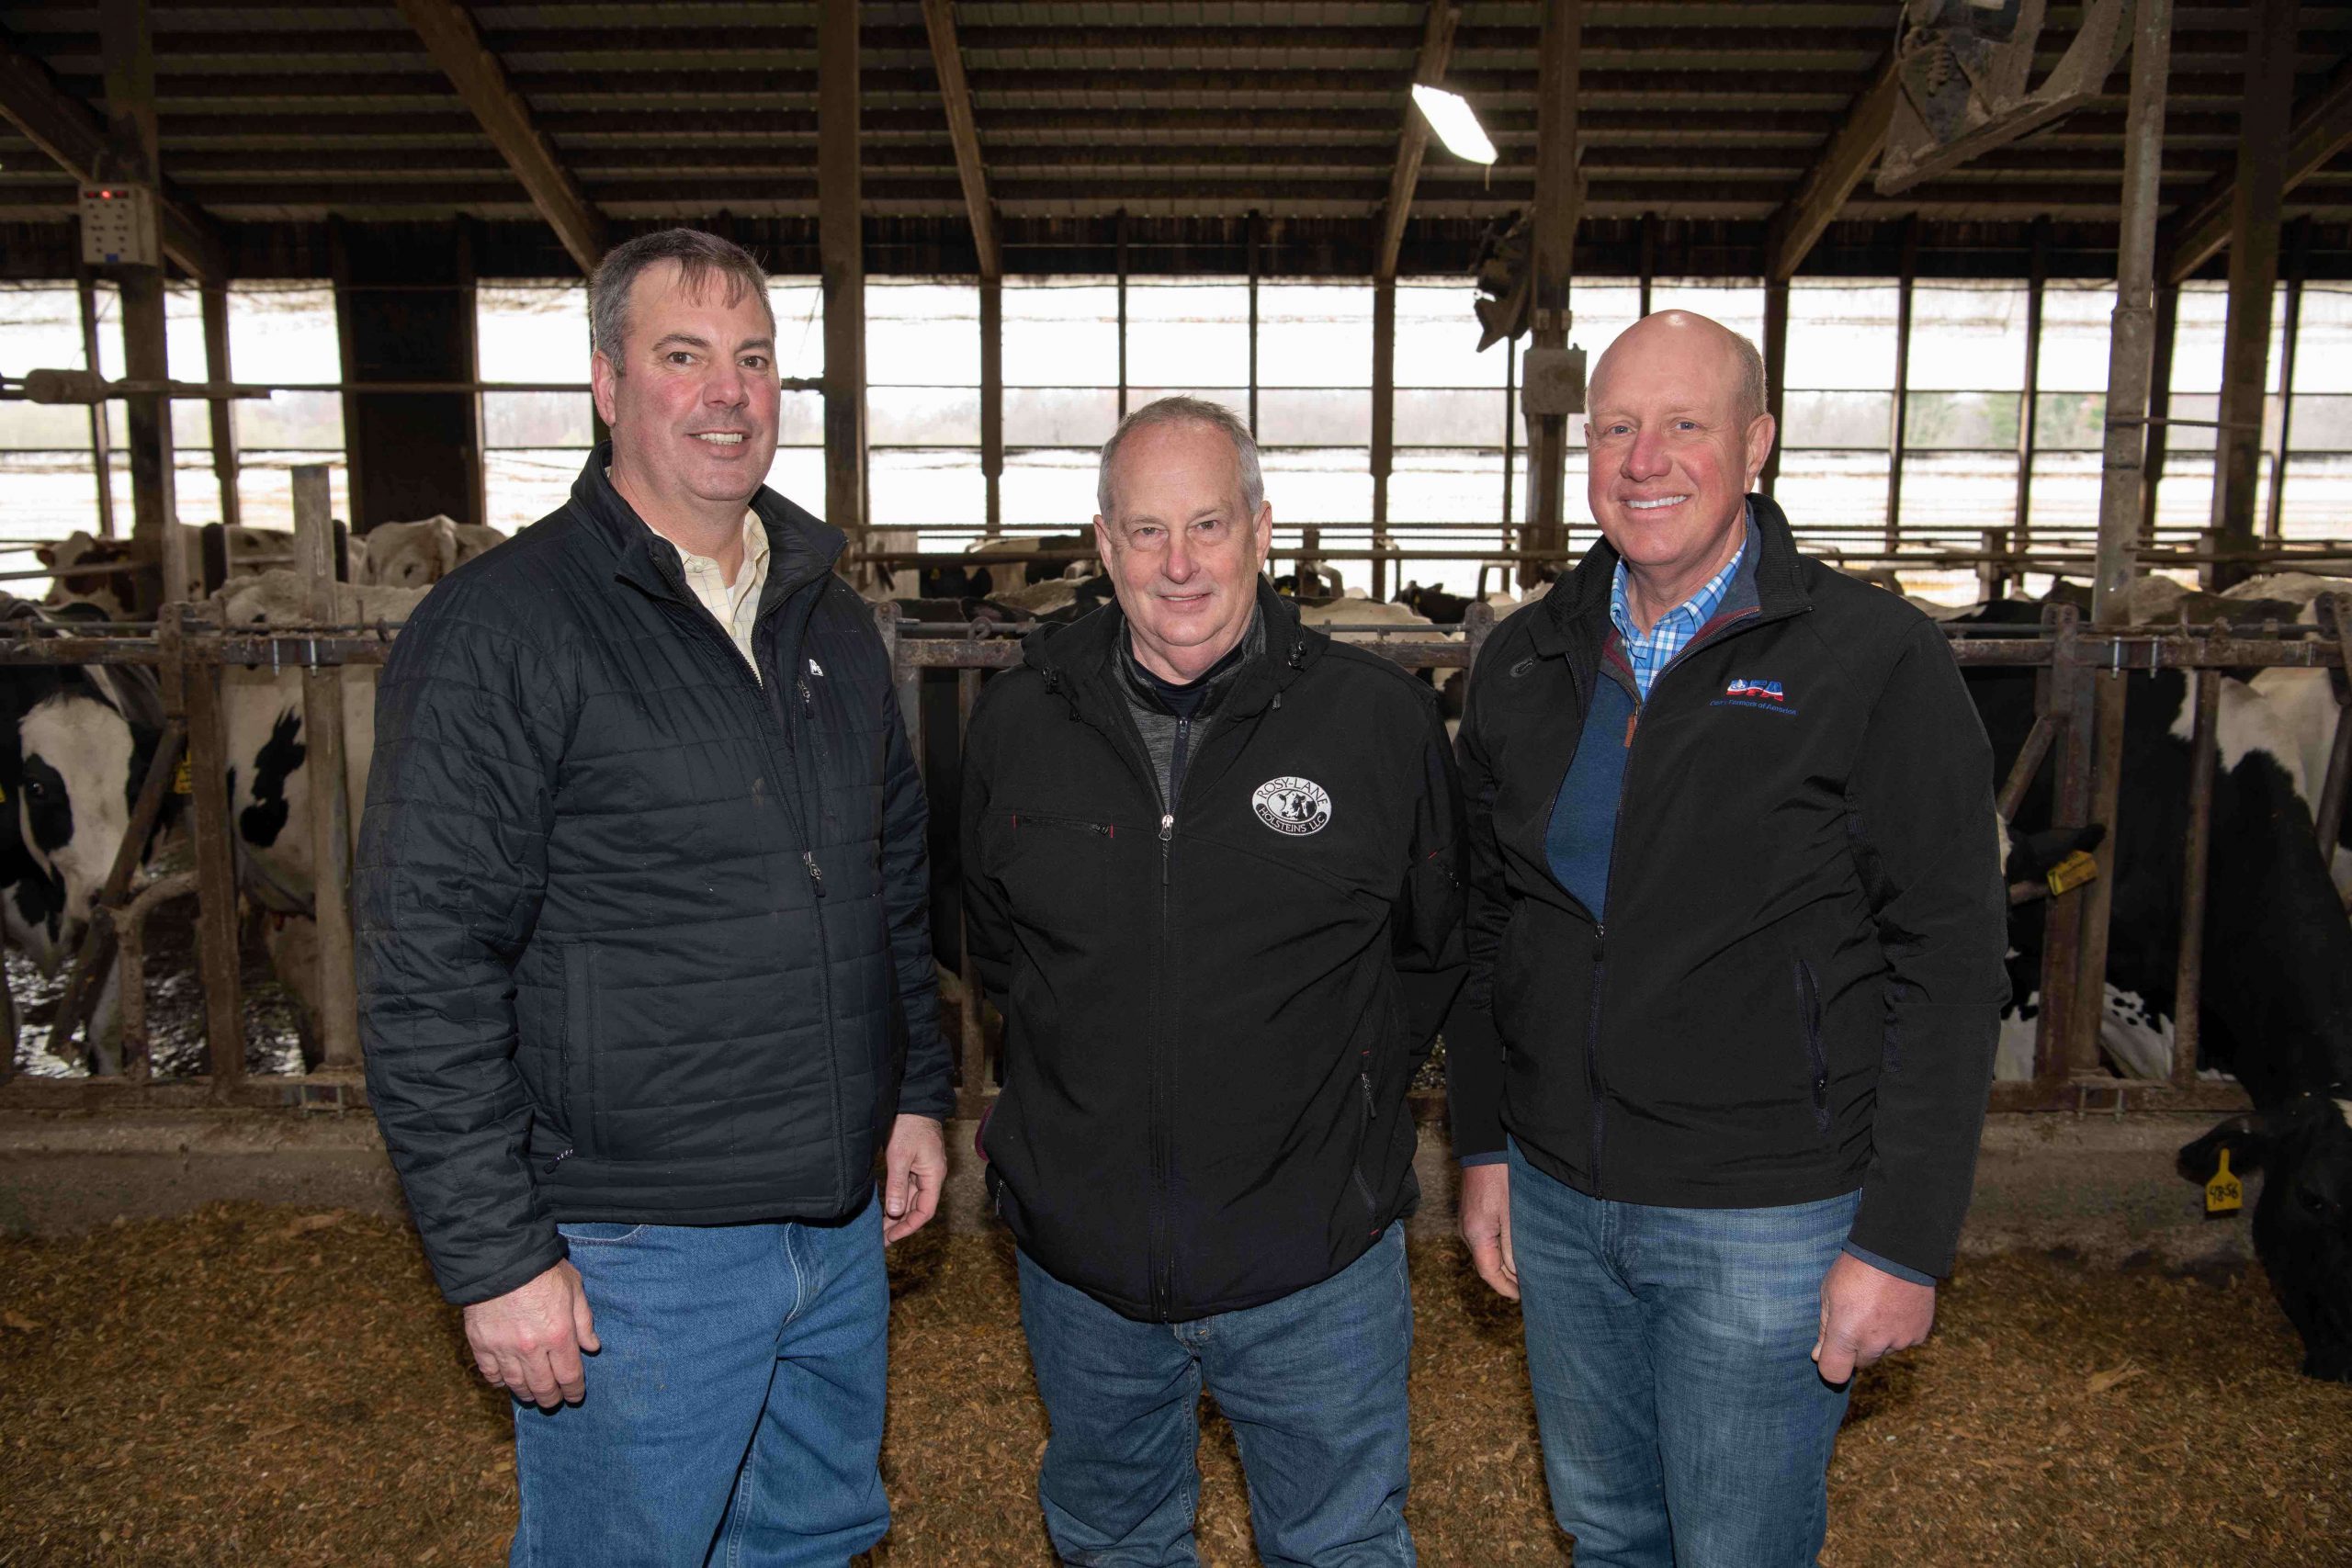 Two New Producers Join Advisory Committee